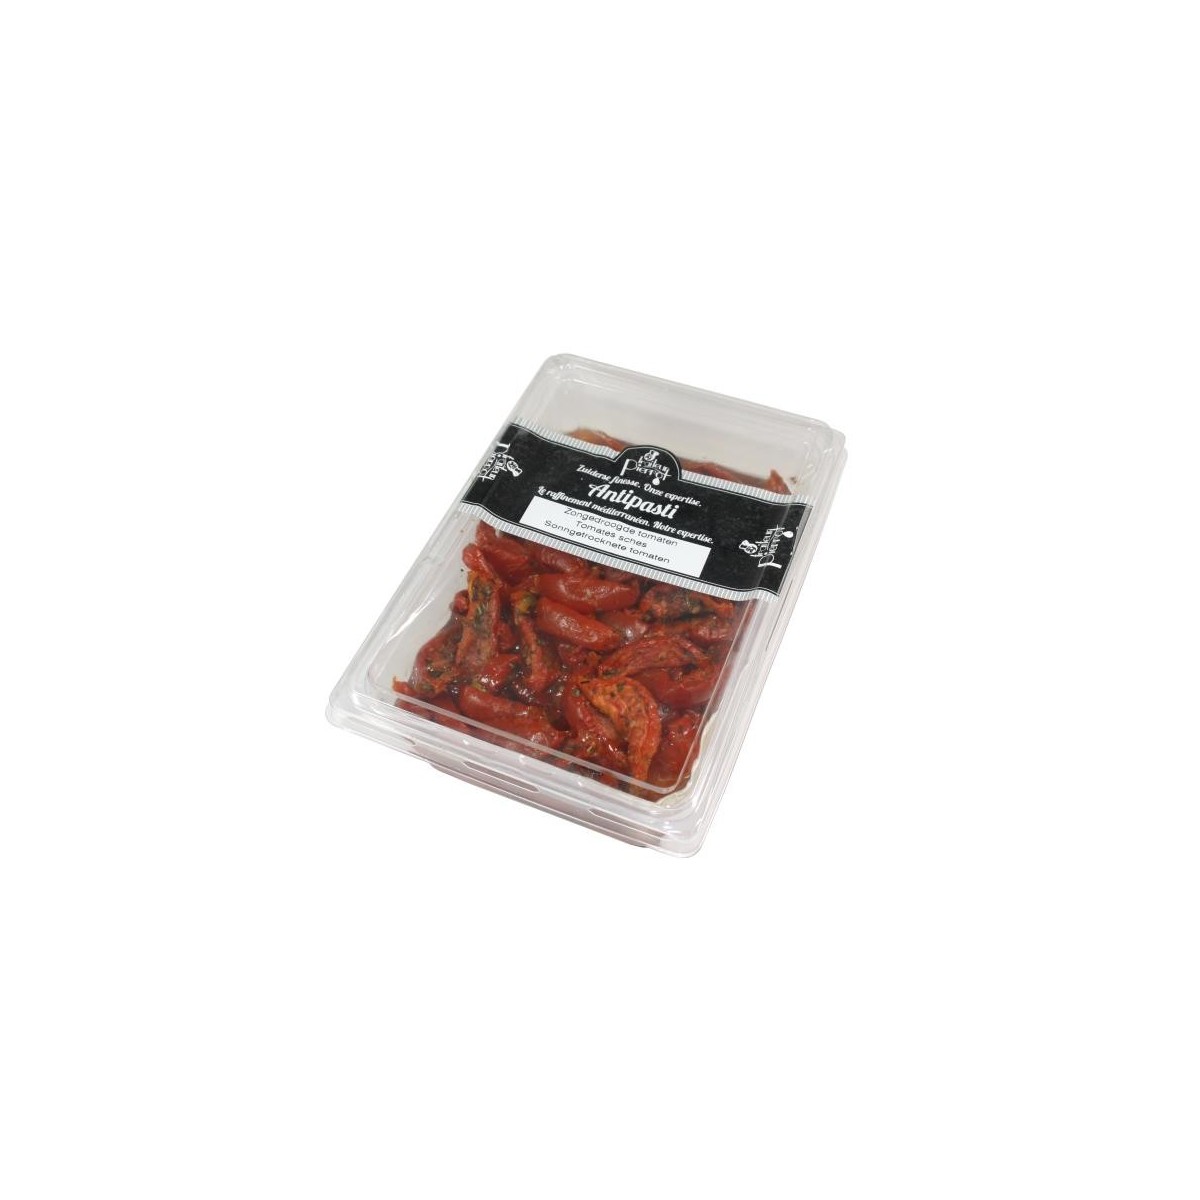 SEMI DRIED TOMATOES IN OIL 4 X 1KG SOET O SON  CAN